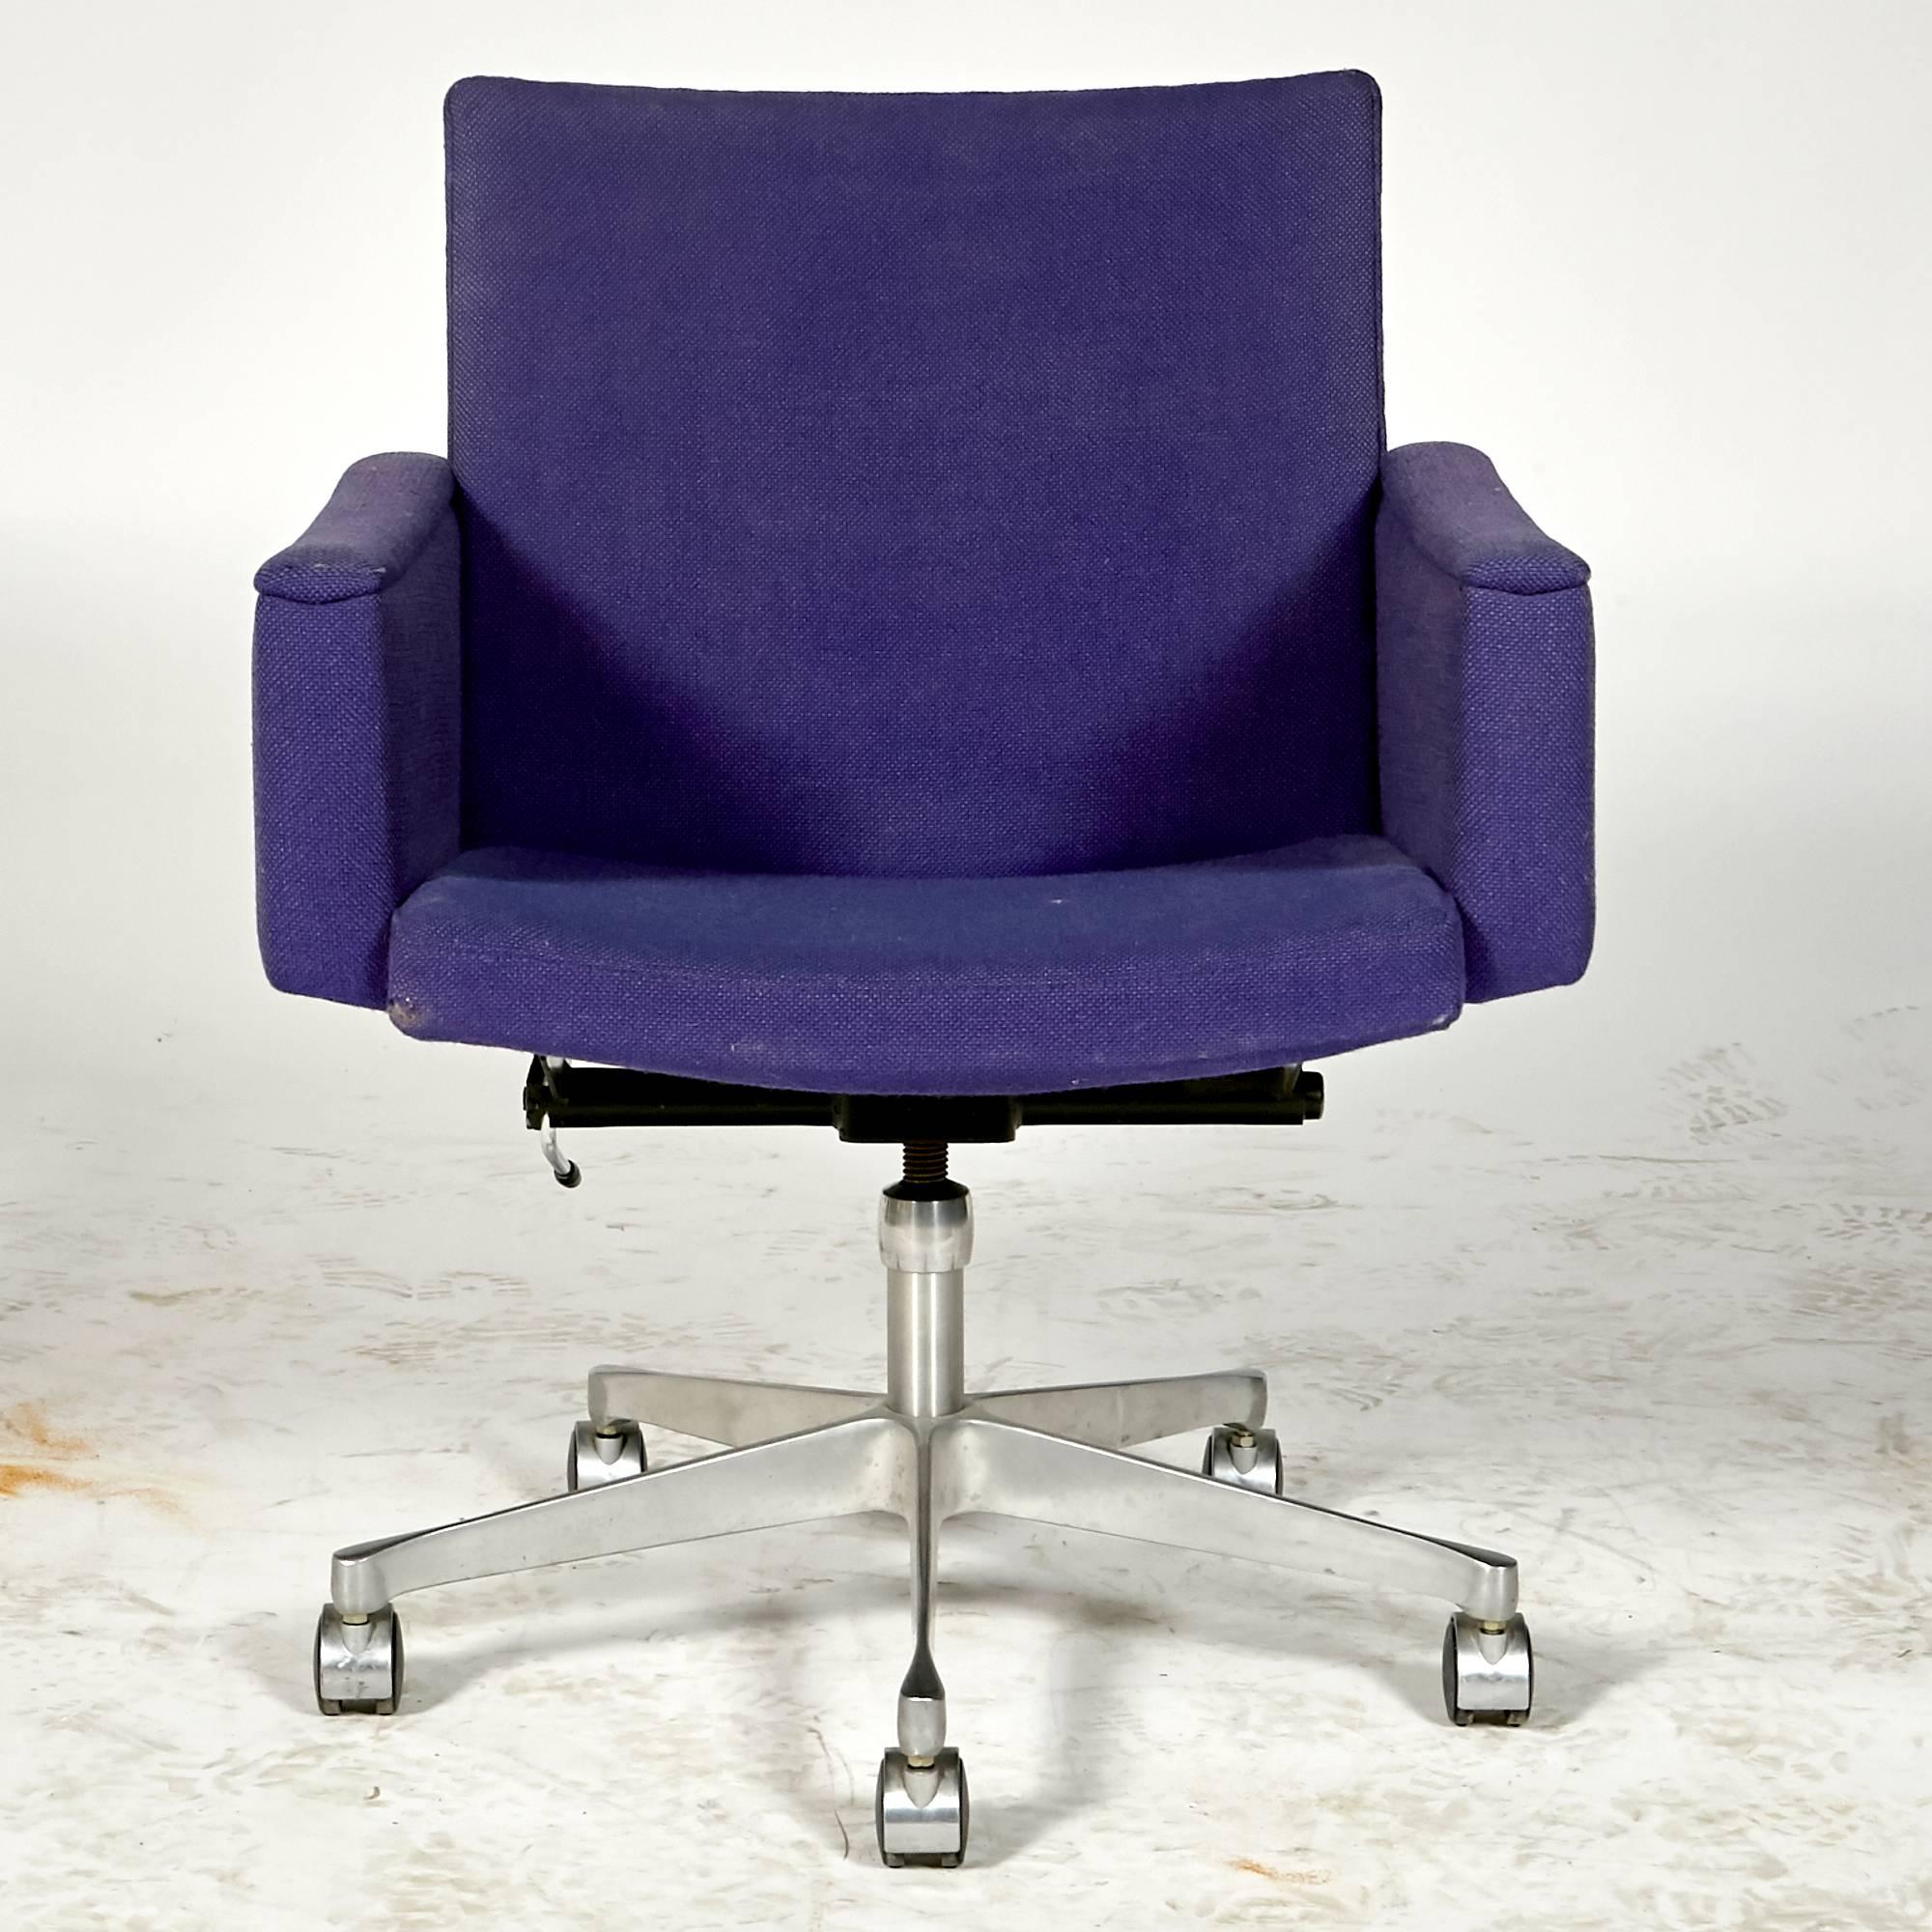 Vintage 1960s office chair Norwegian designer Ring Mekanikk. Made in Norway. Cast aluminium base with adjustable reclining back and rolling wheels in original purple fabric. Fabric needs replacement. Measures: Arm height 24